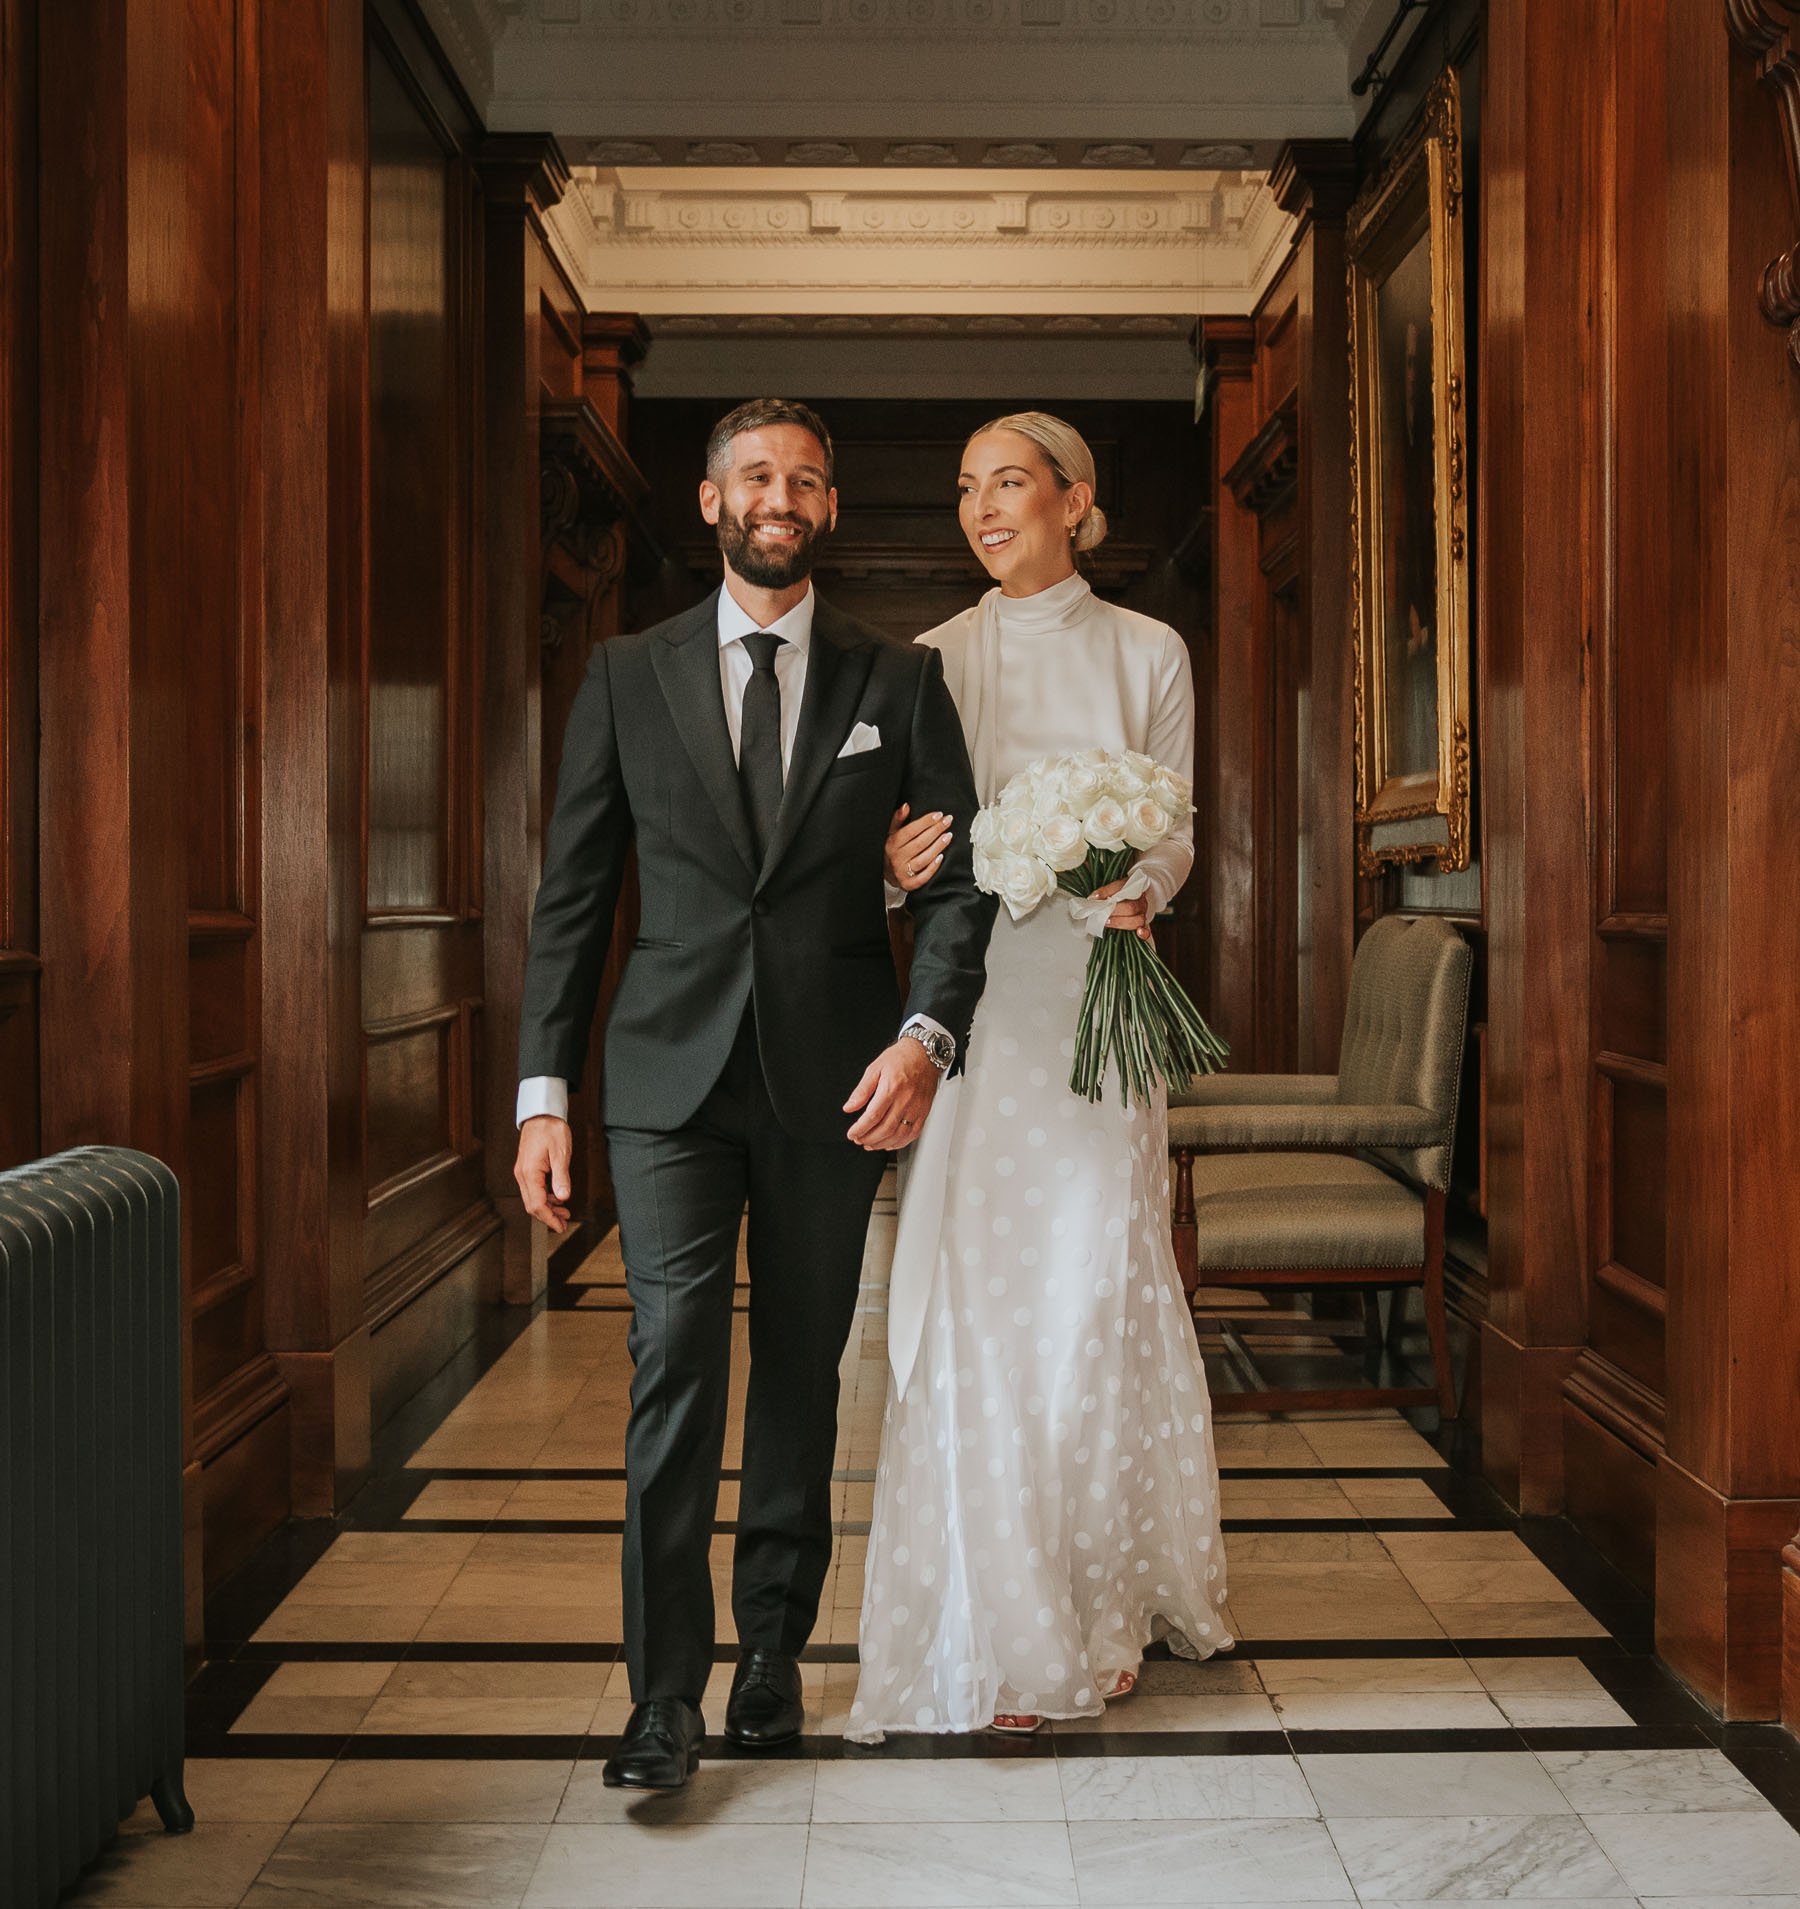 Just married at The Old Marylebone Town Hall